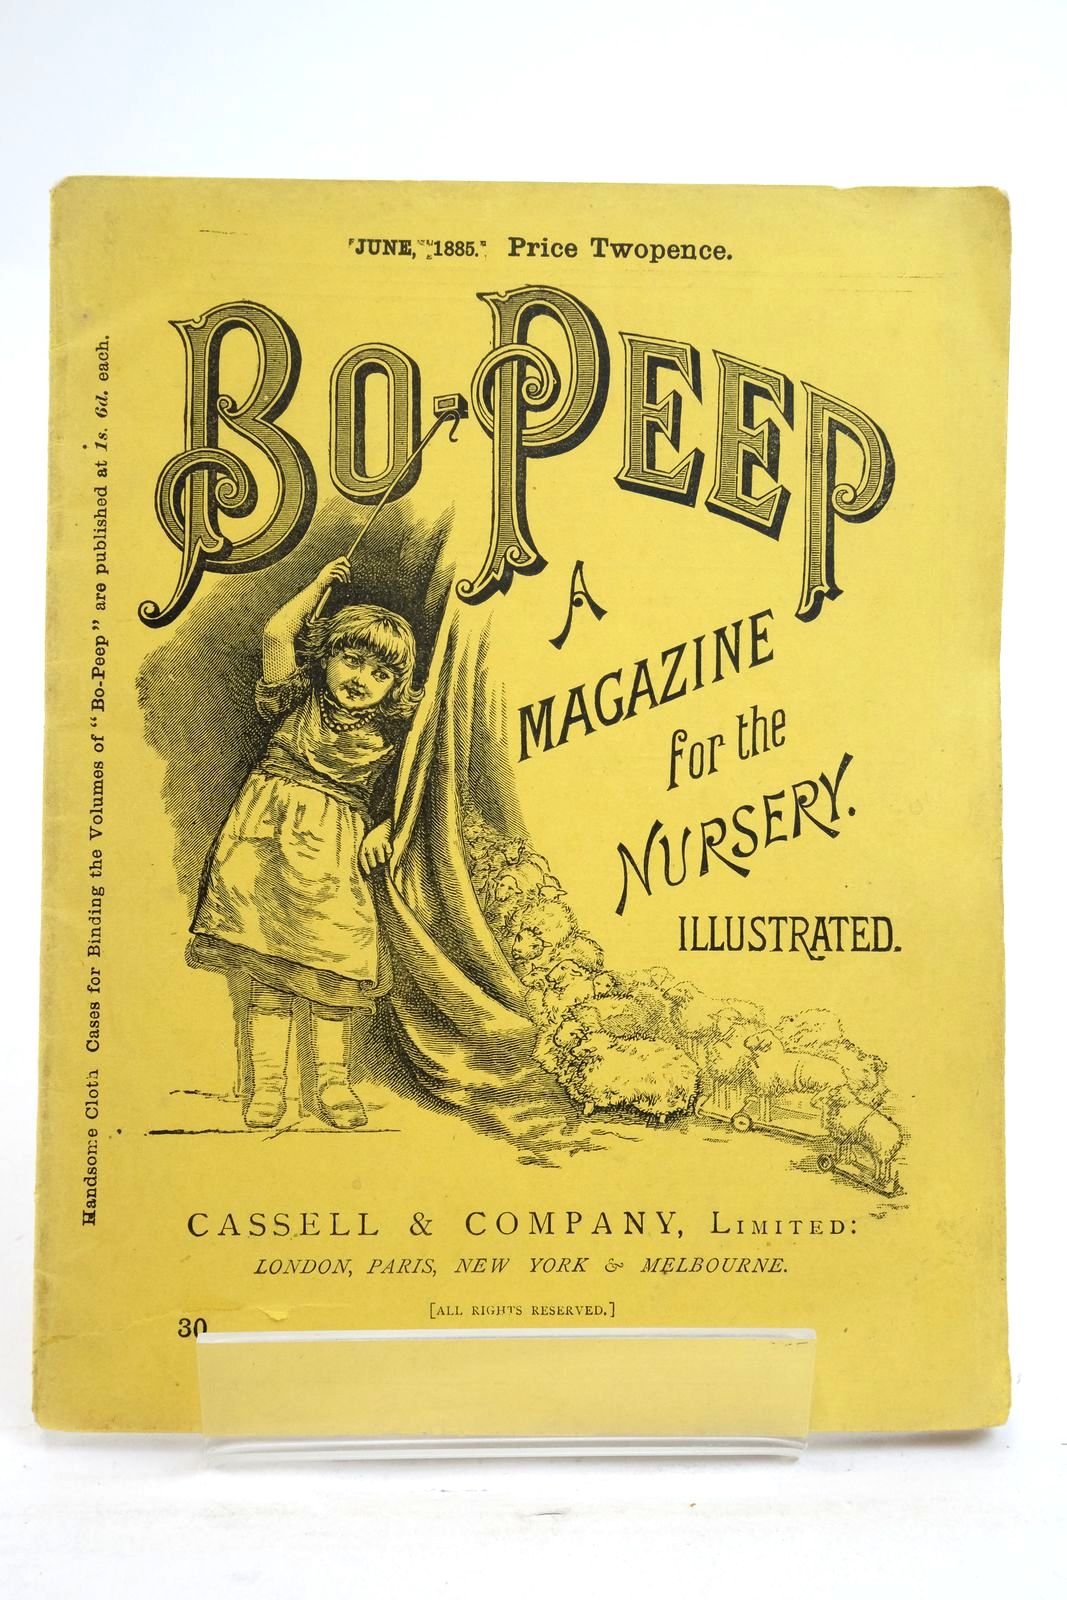 Photo of BO-PEEP: A MAGAZINE FOR THE NURSERY JUNE 1885 published by Cassell & Company Limited (STOCK CODE: 2137114)  for sale by Stella & Rose's Books